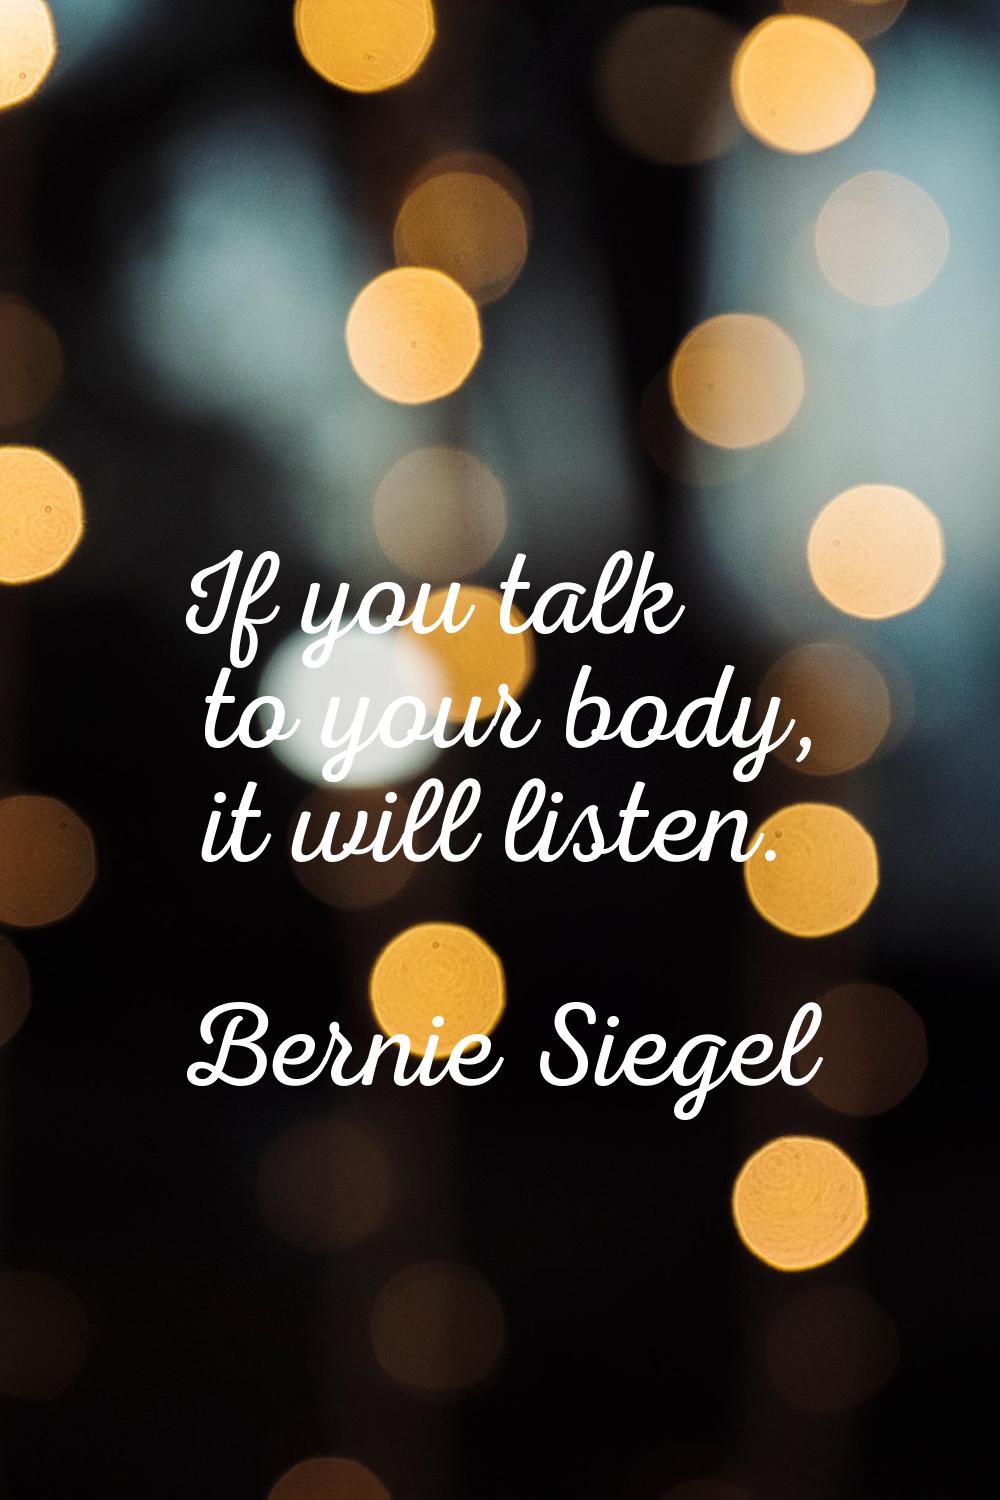 If you talk to your body, it will listen.